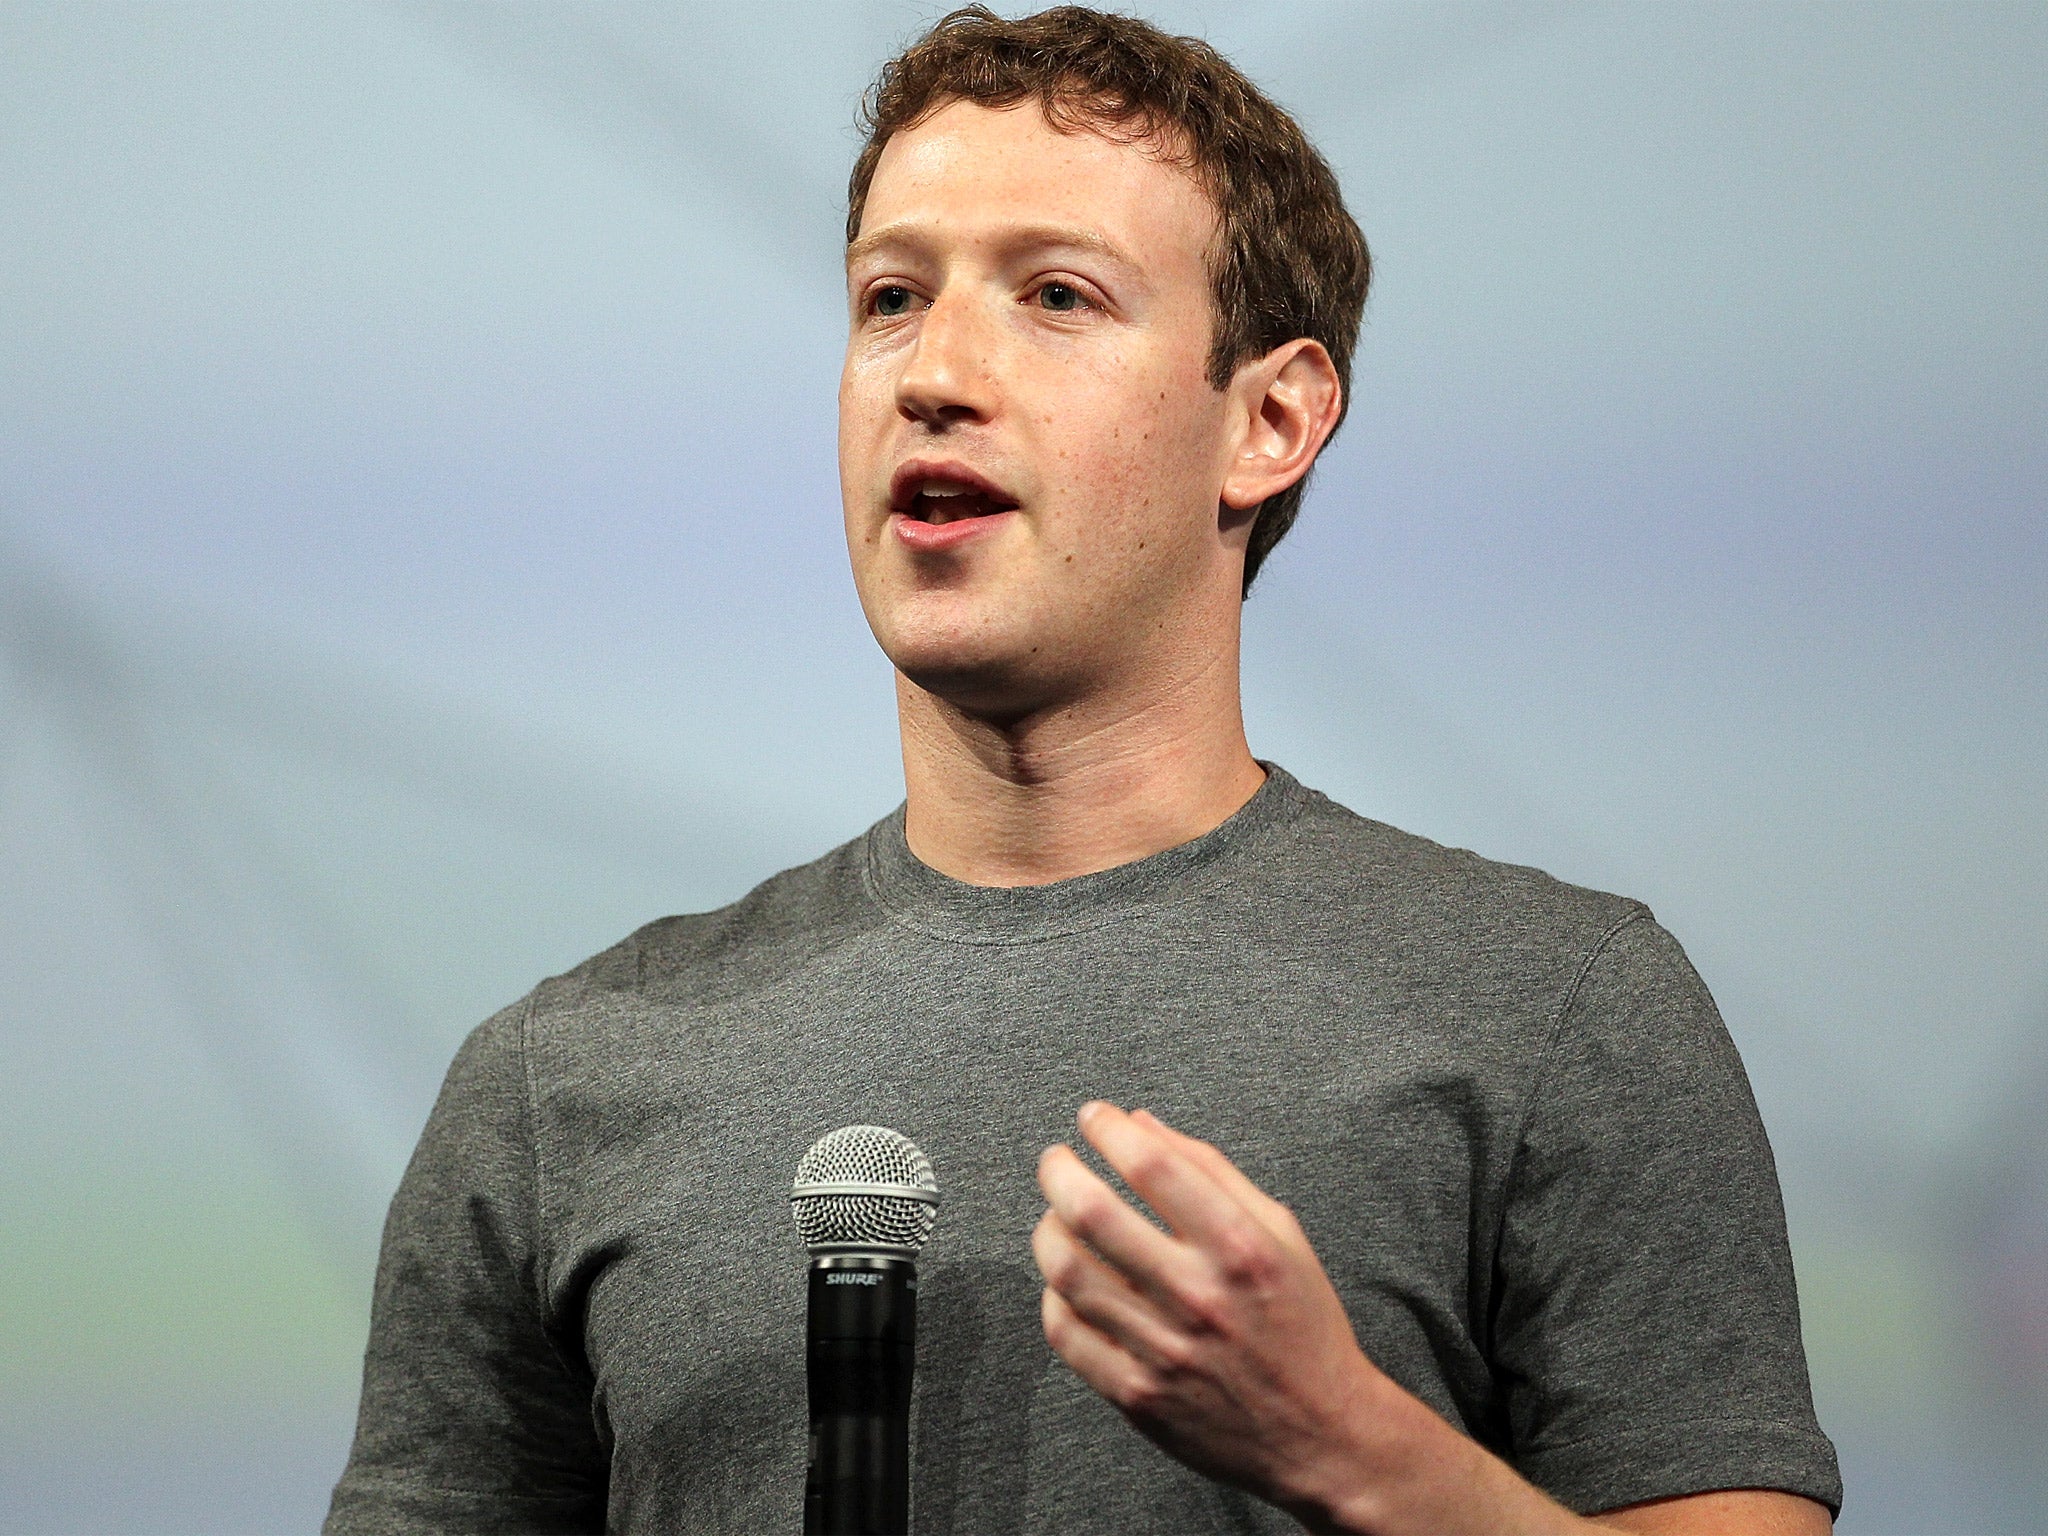 Facebook CEO Mark Zuckerberg speaking at a conference in San Francisco last month